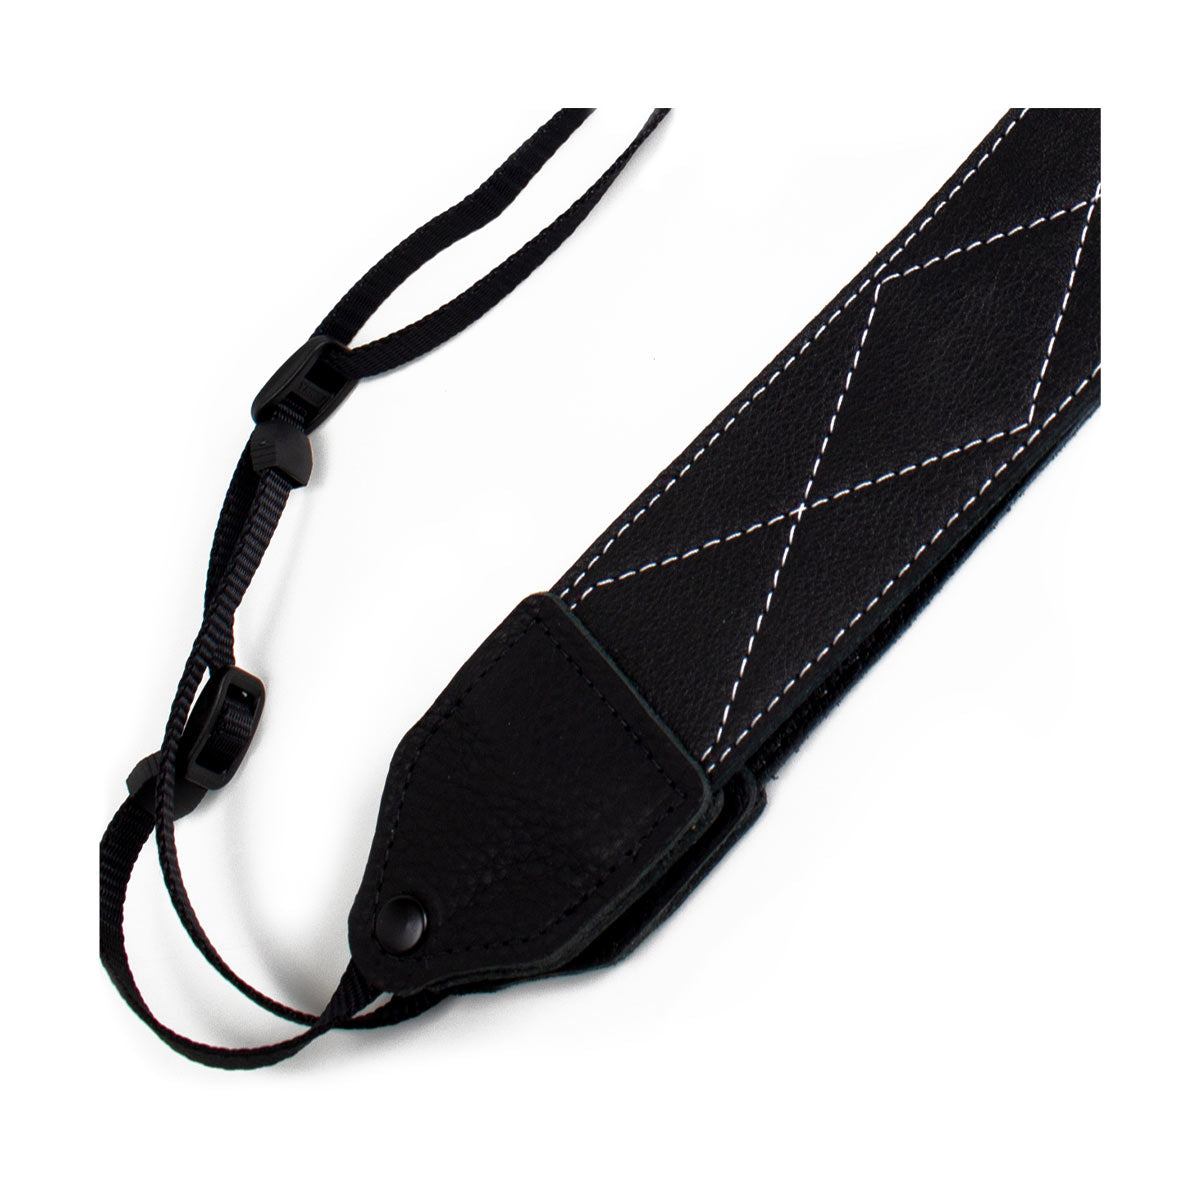 Perri's Leathers 2" Leather Strap with XX Stitch (Black)